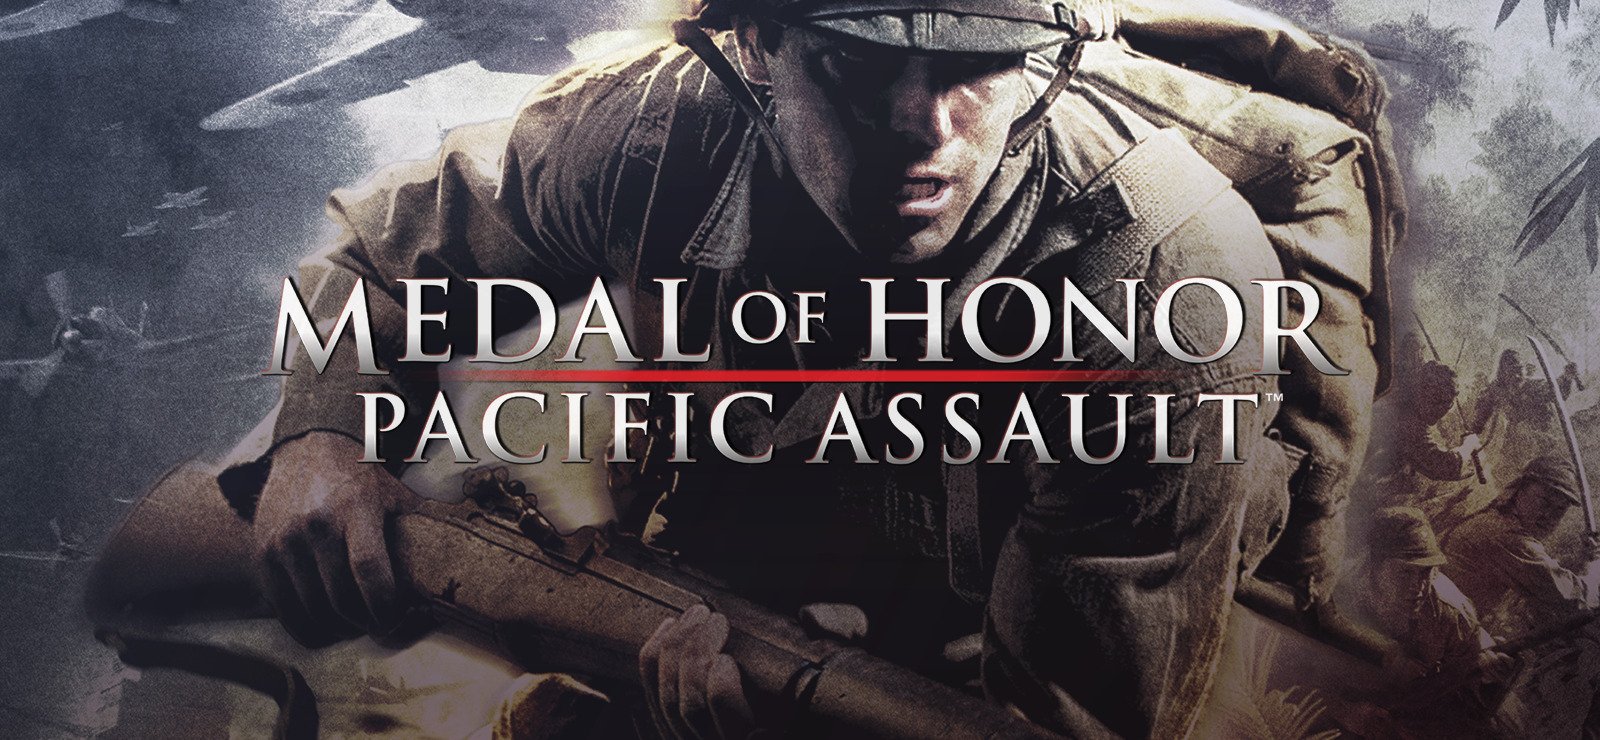 Medal of Honor Pacific Assault 1